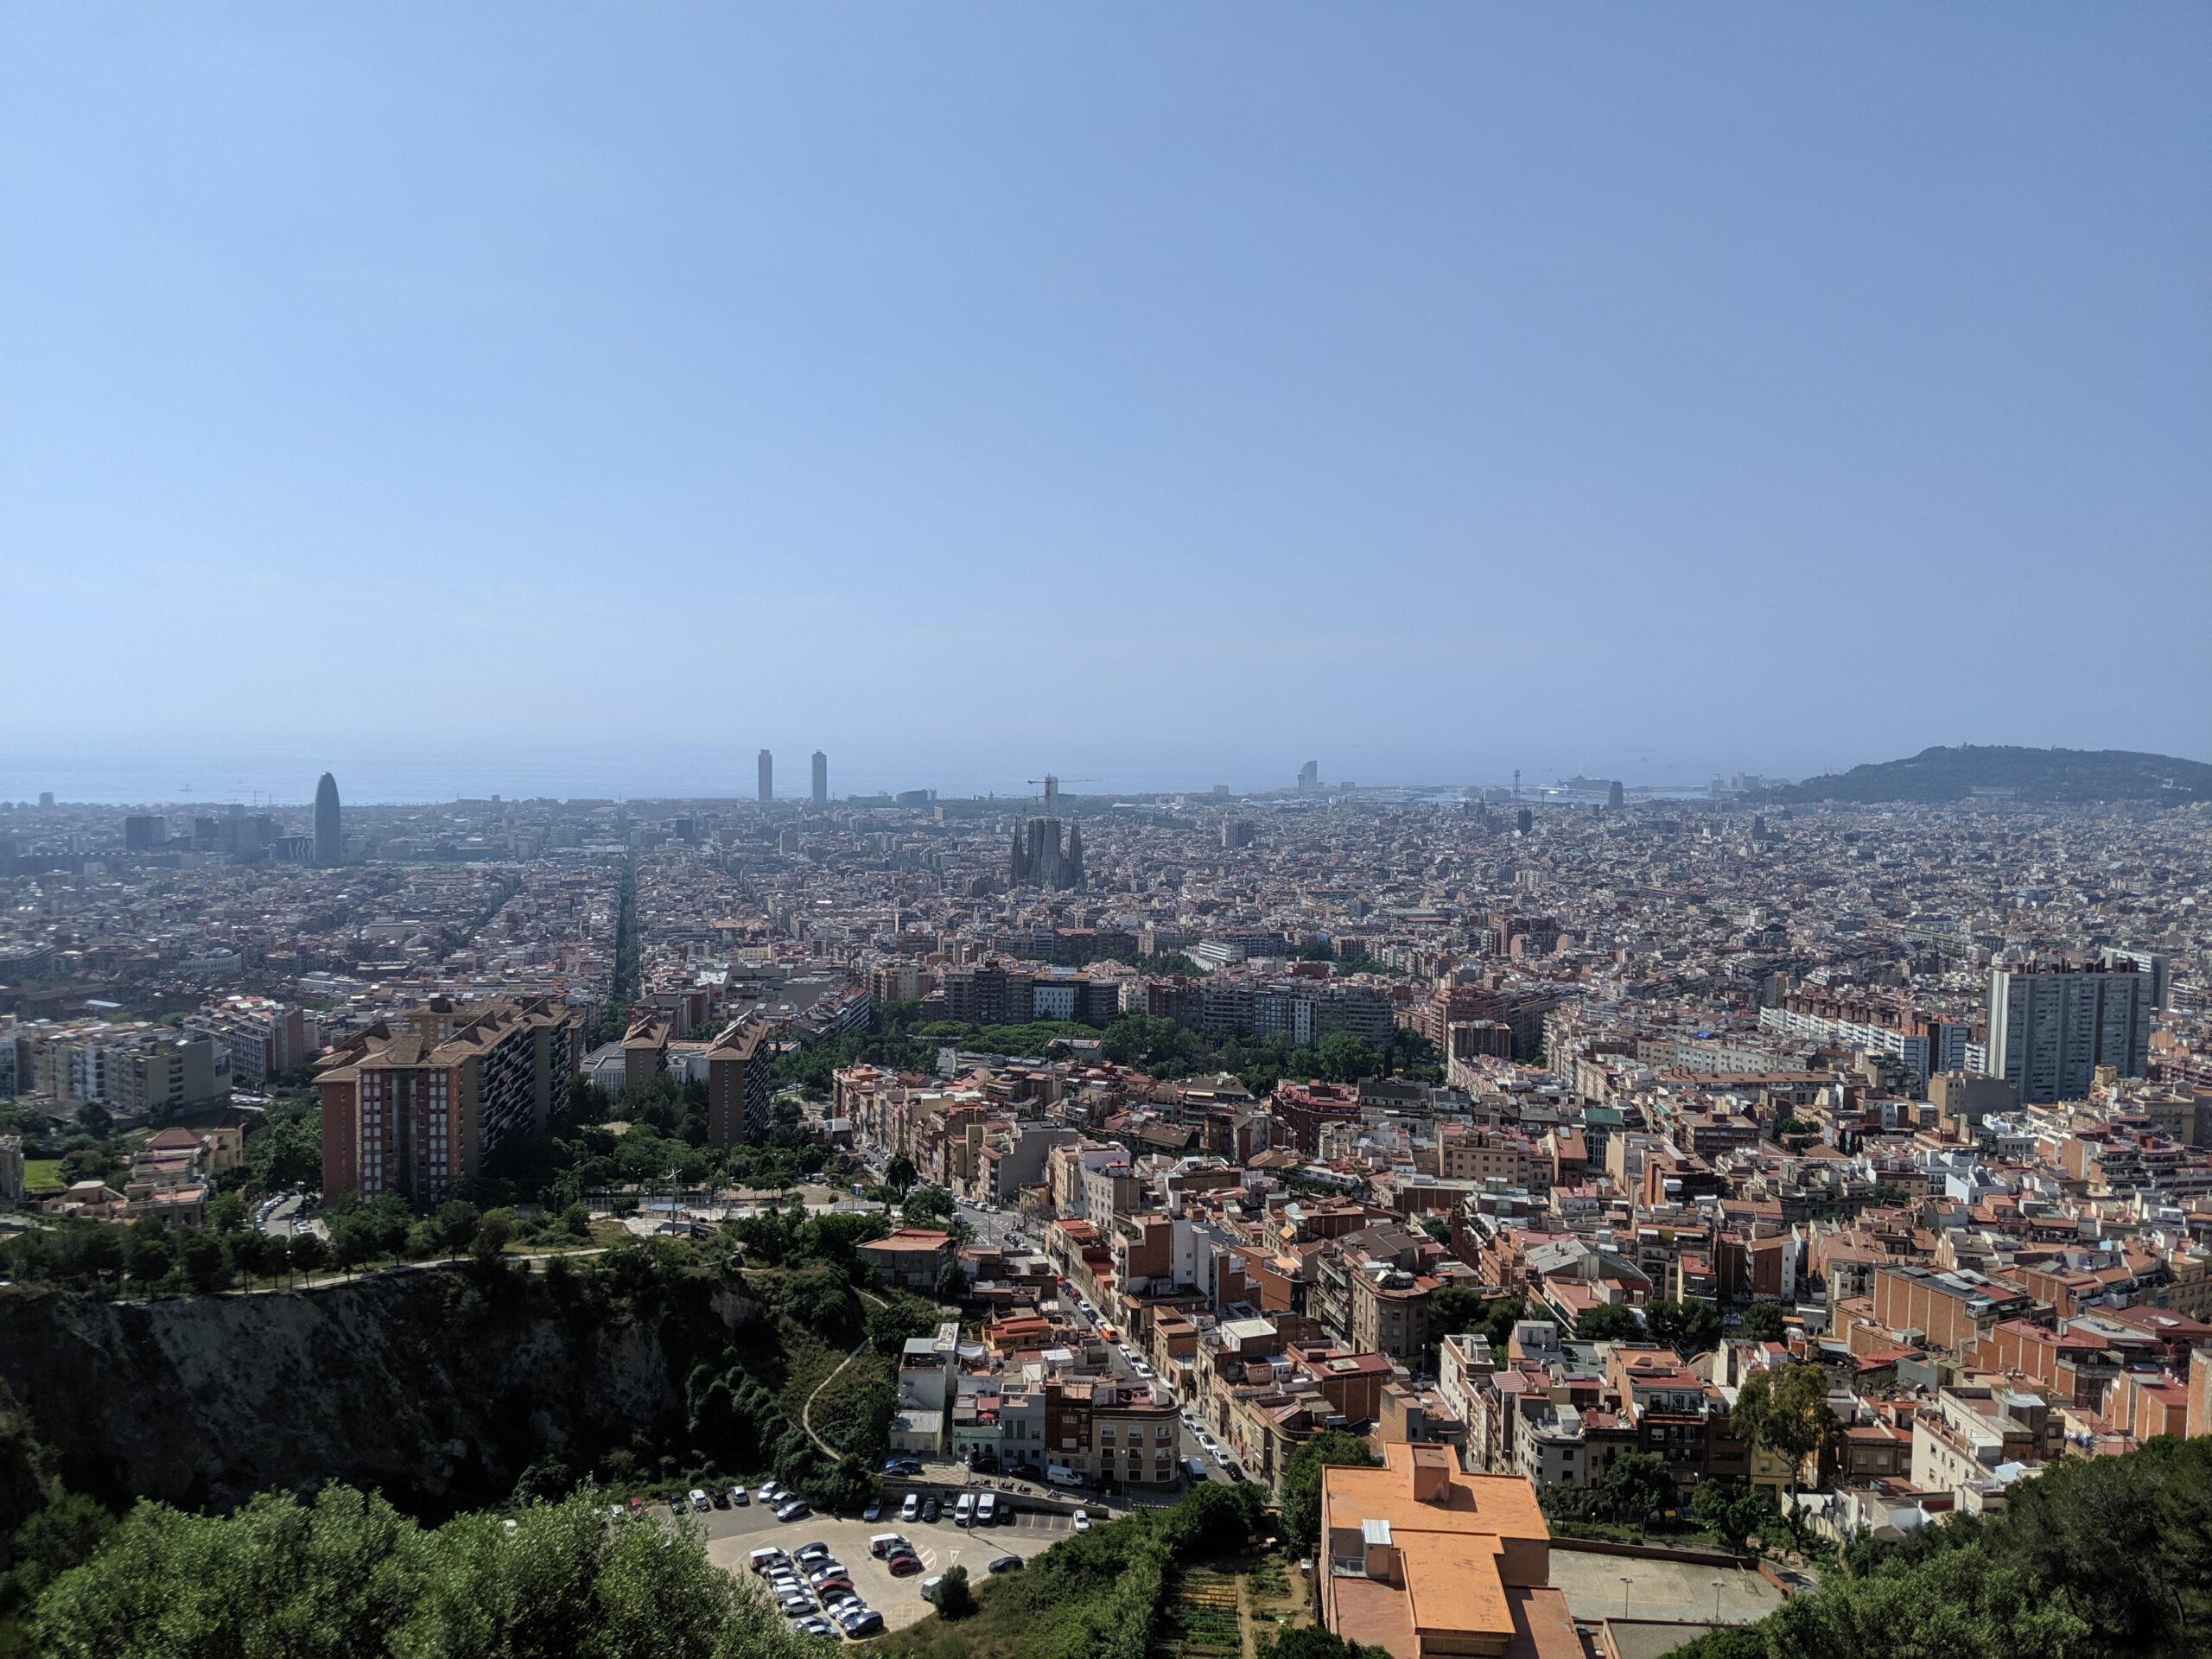 Overview of Barcelona from a high point